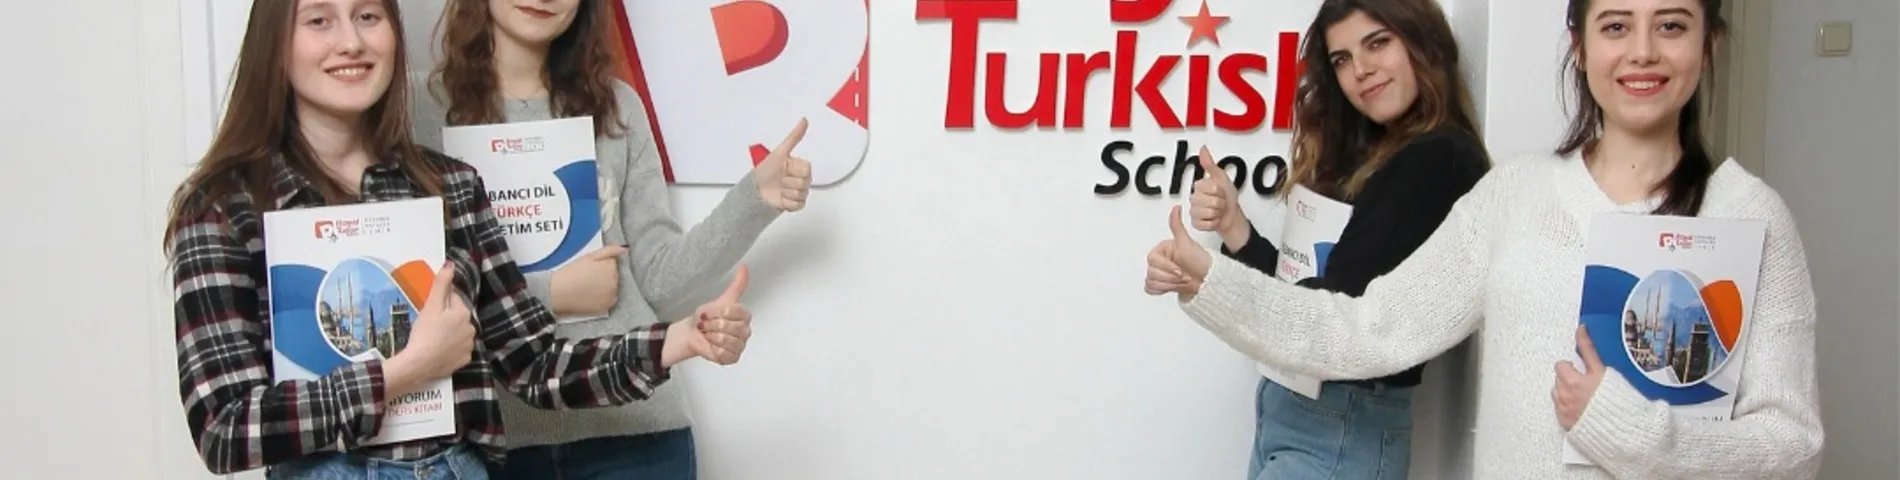 Royal Turkish Education Center picture 1